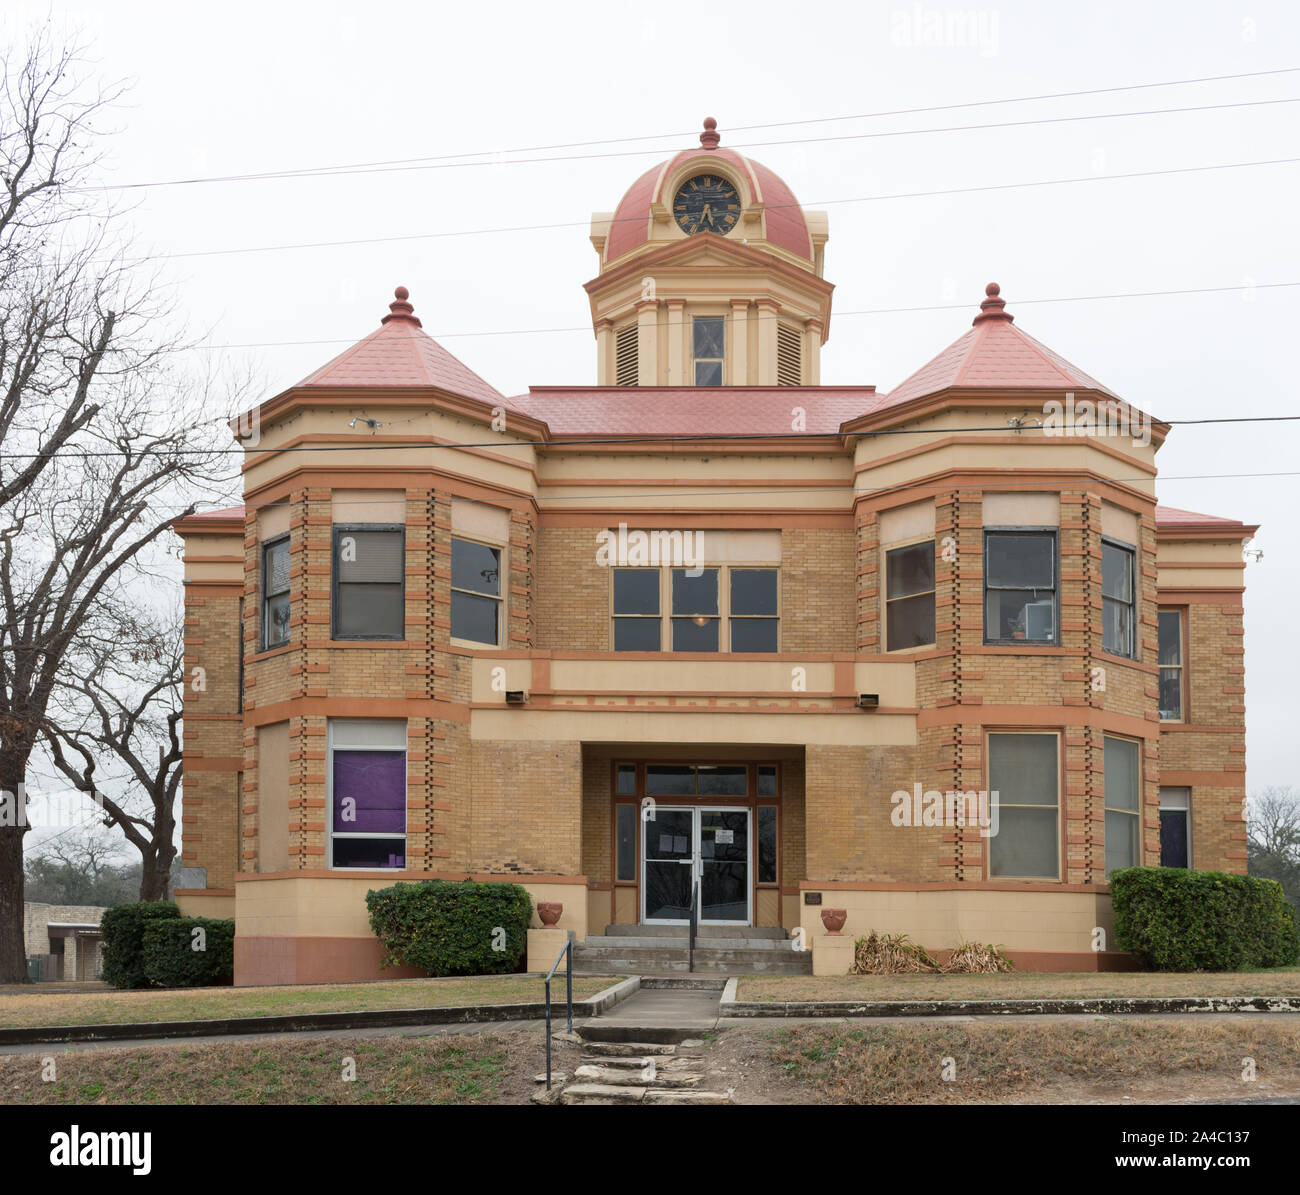 The Kinney County Courthouse in Bracketville, Texas. It was built in 1910 and is an example of Beaux Arts Classicism architecture Stock Photo